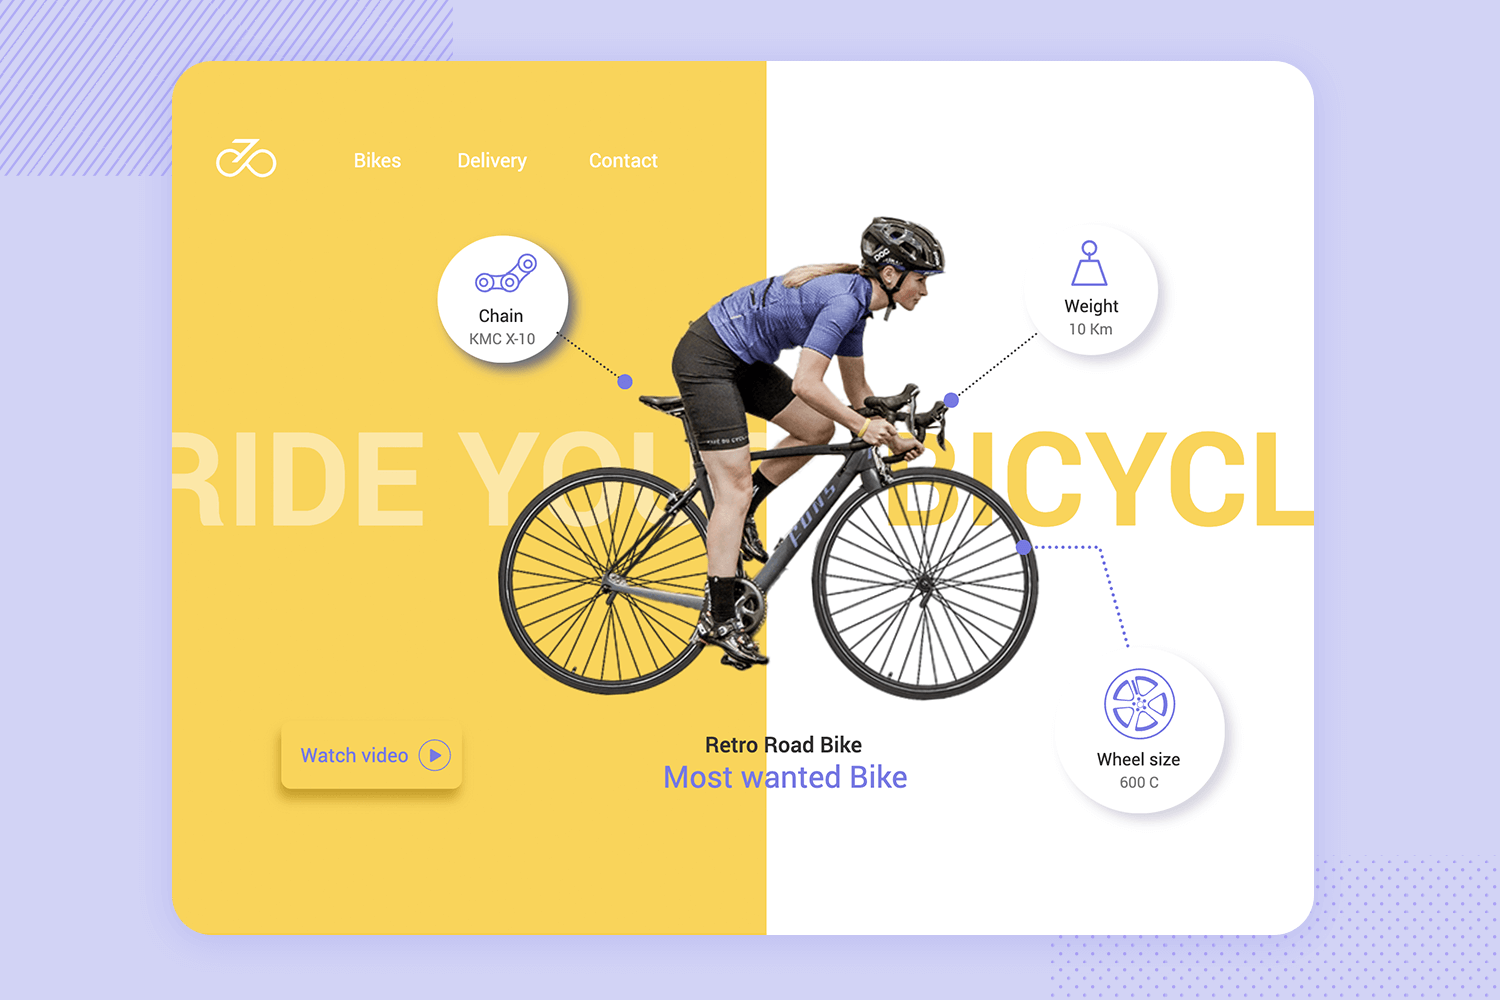 Bike store app mockup showcasing a detailed bike profile with chain type, weight, and wheel size.